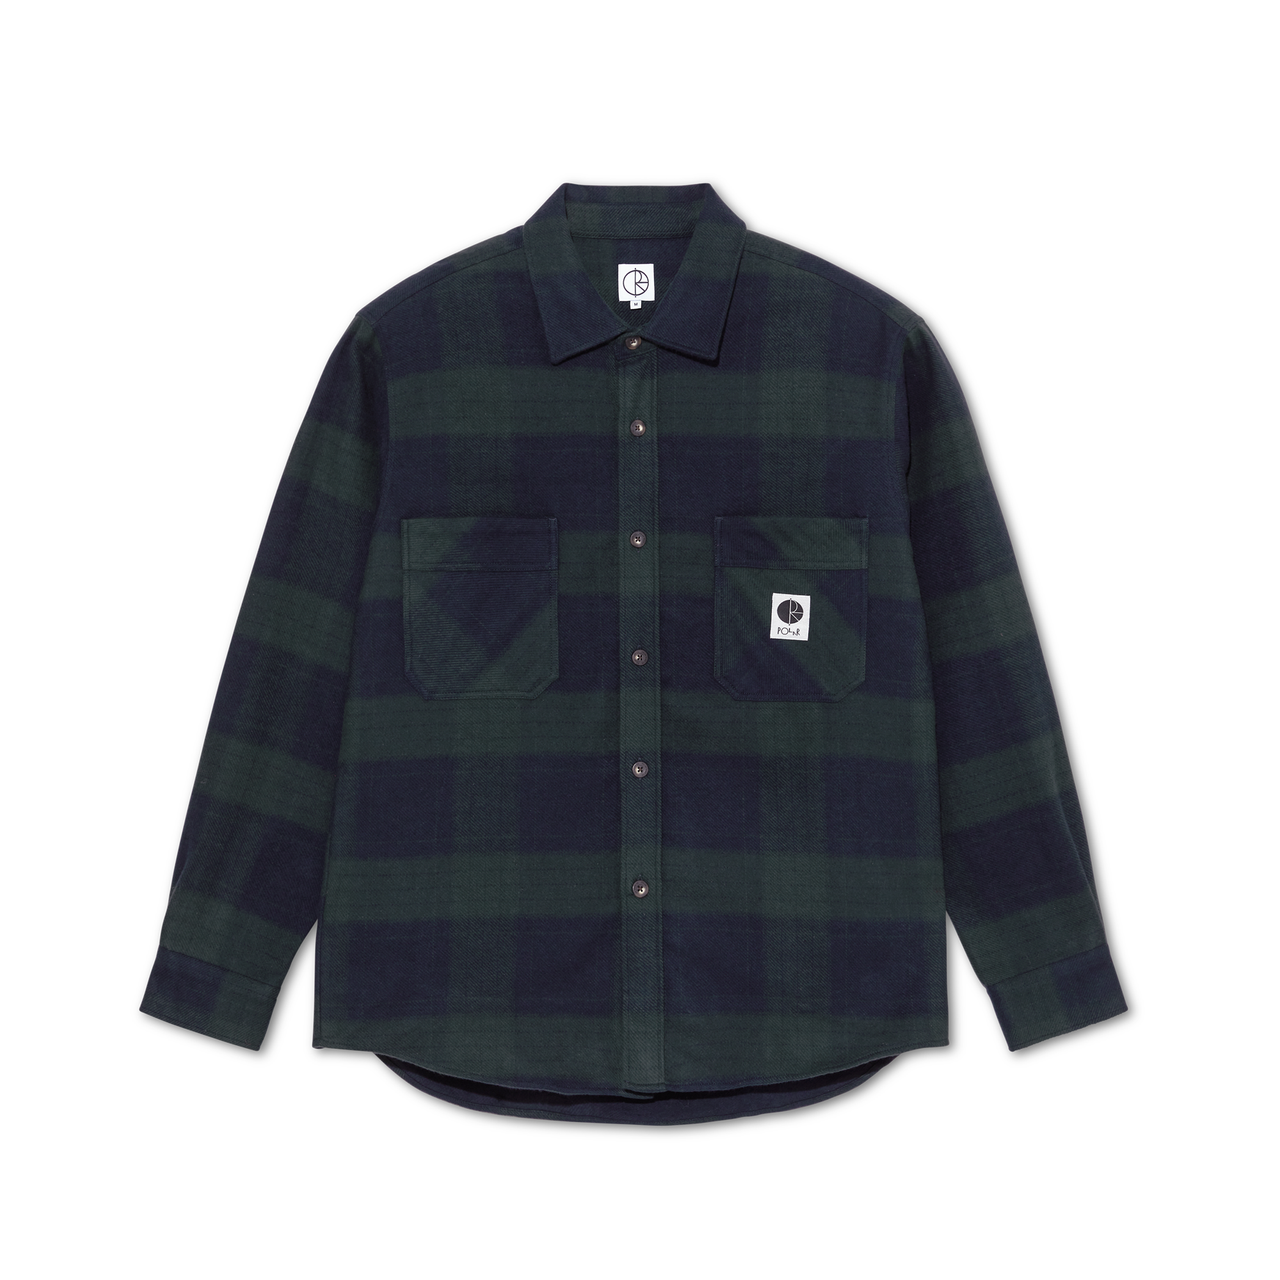 Mike LS Shirt | Flannel - Navy / Teal